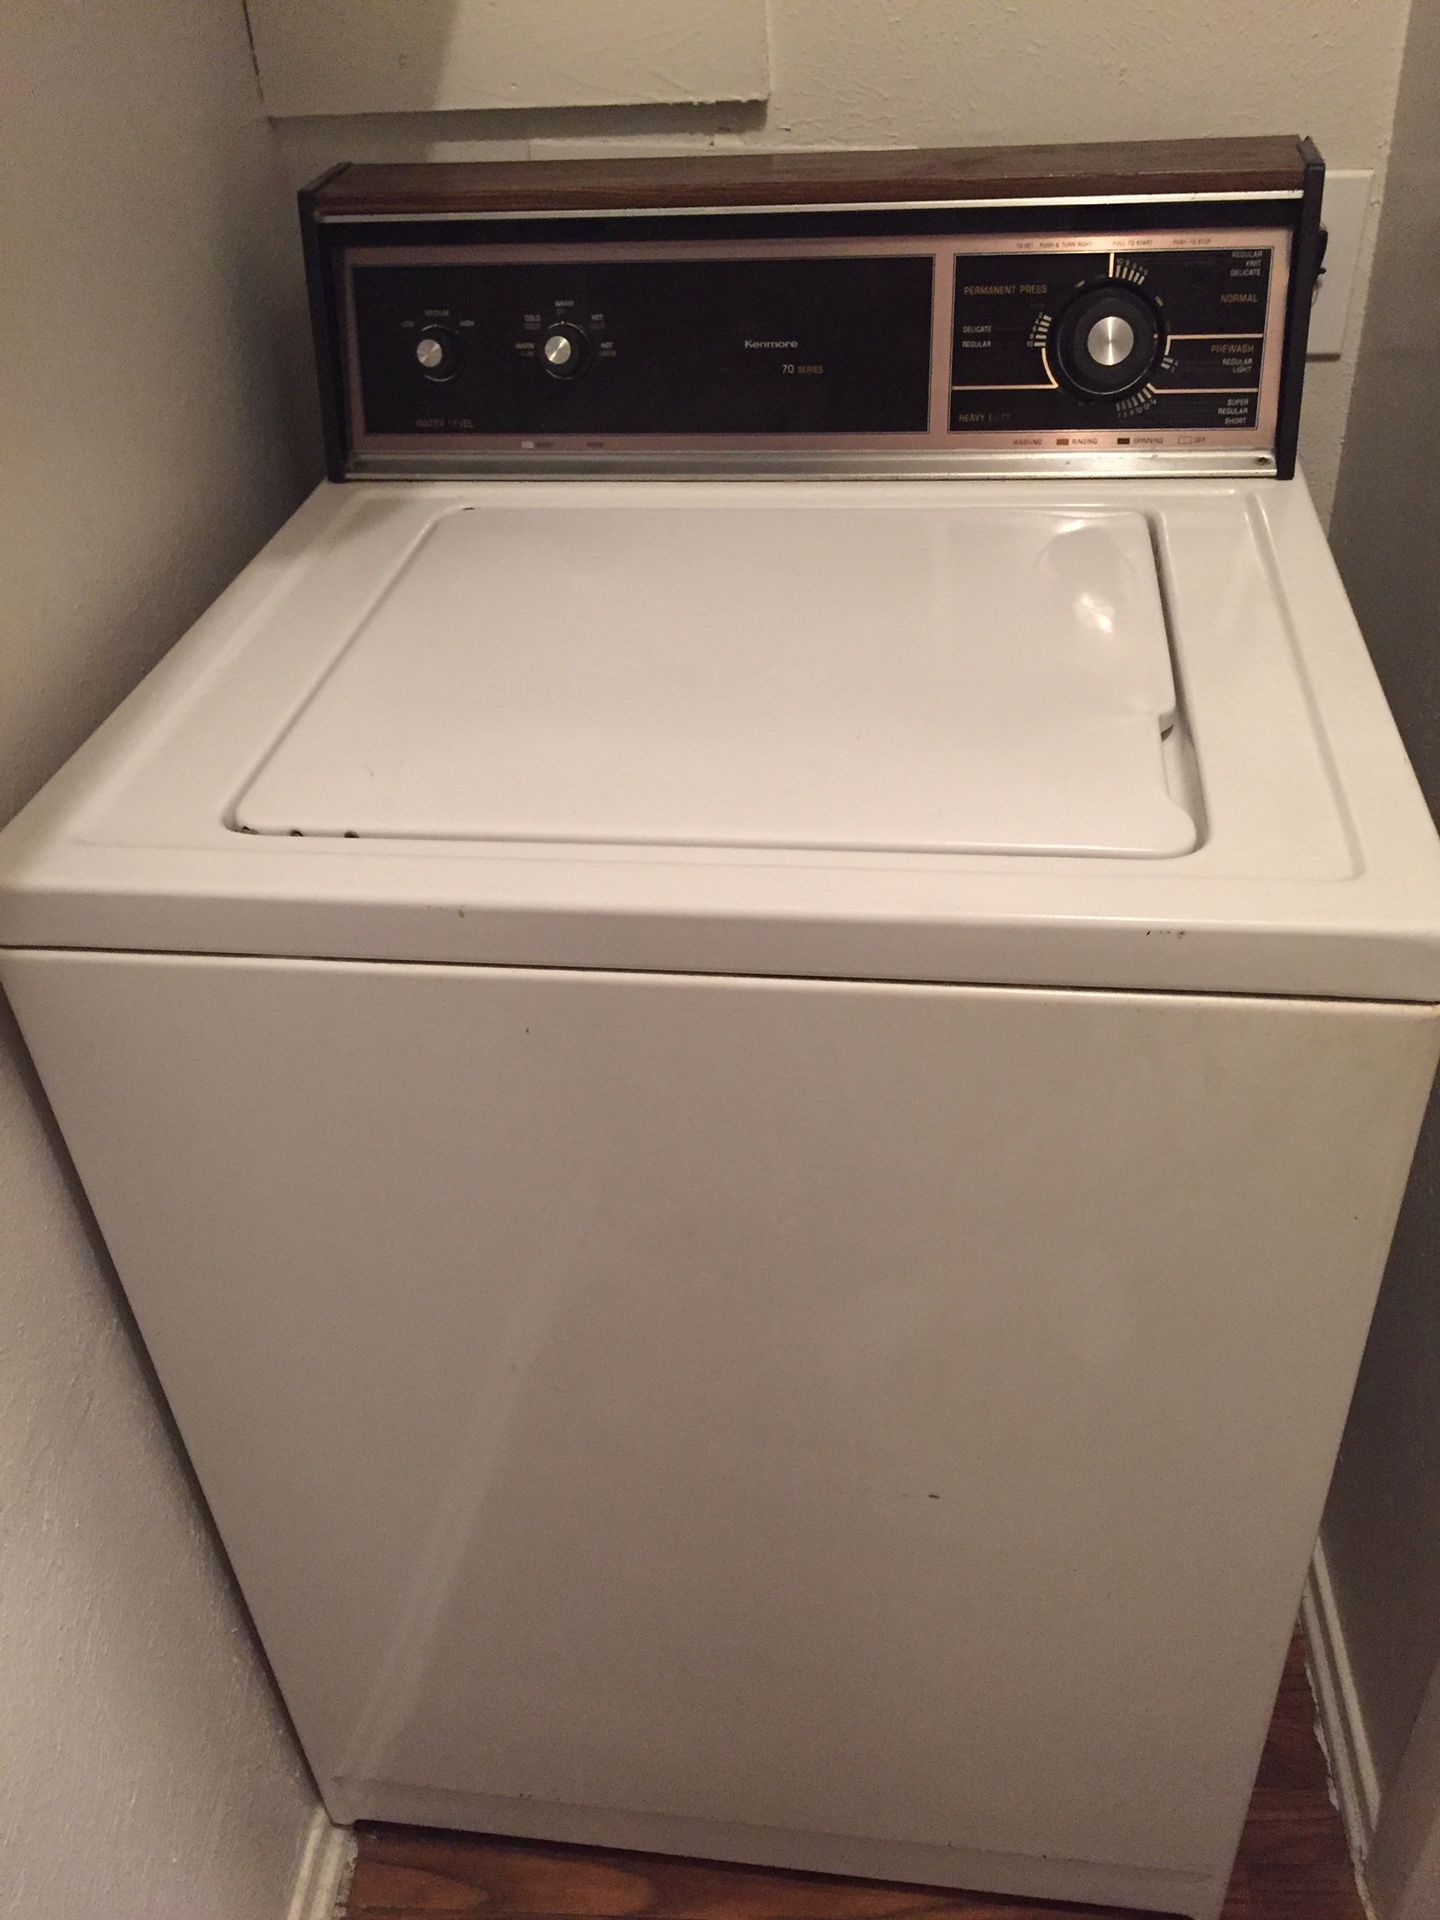 Washer and dryer， Kenmore by whirlpool, heavy duty